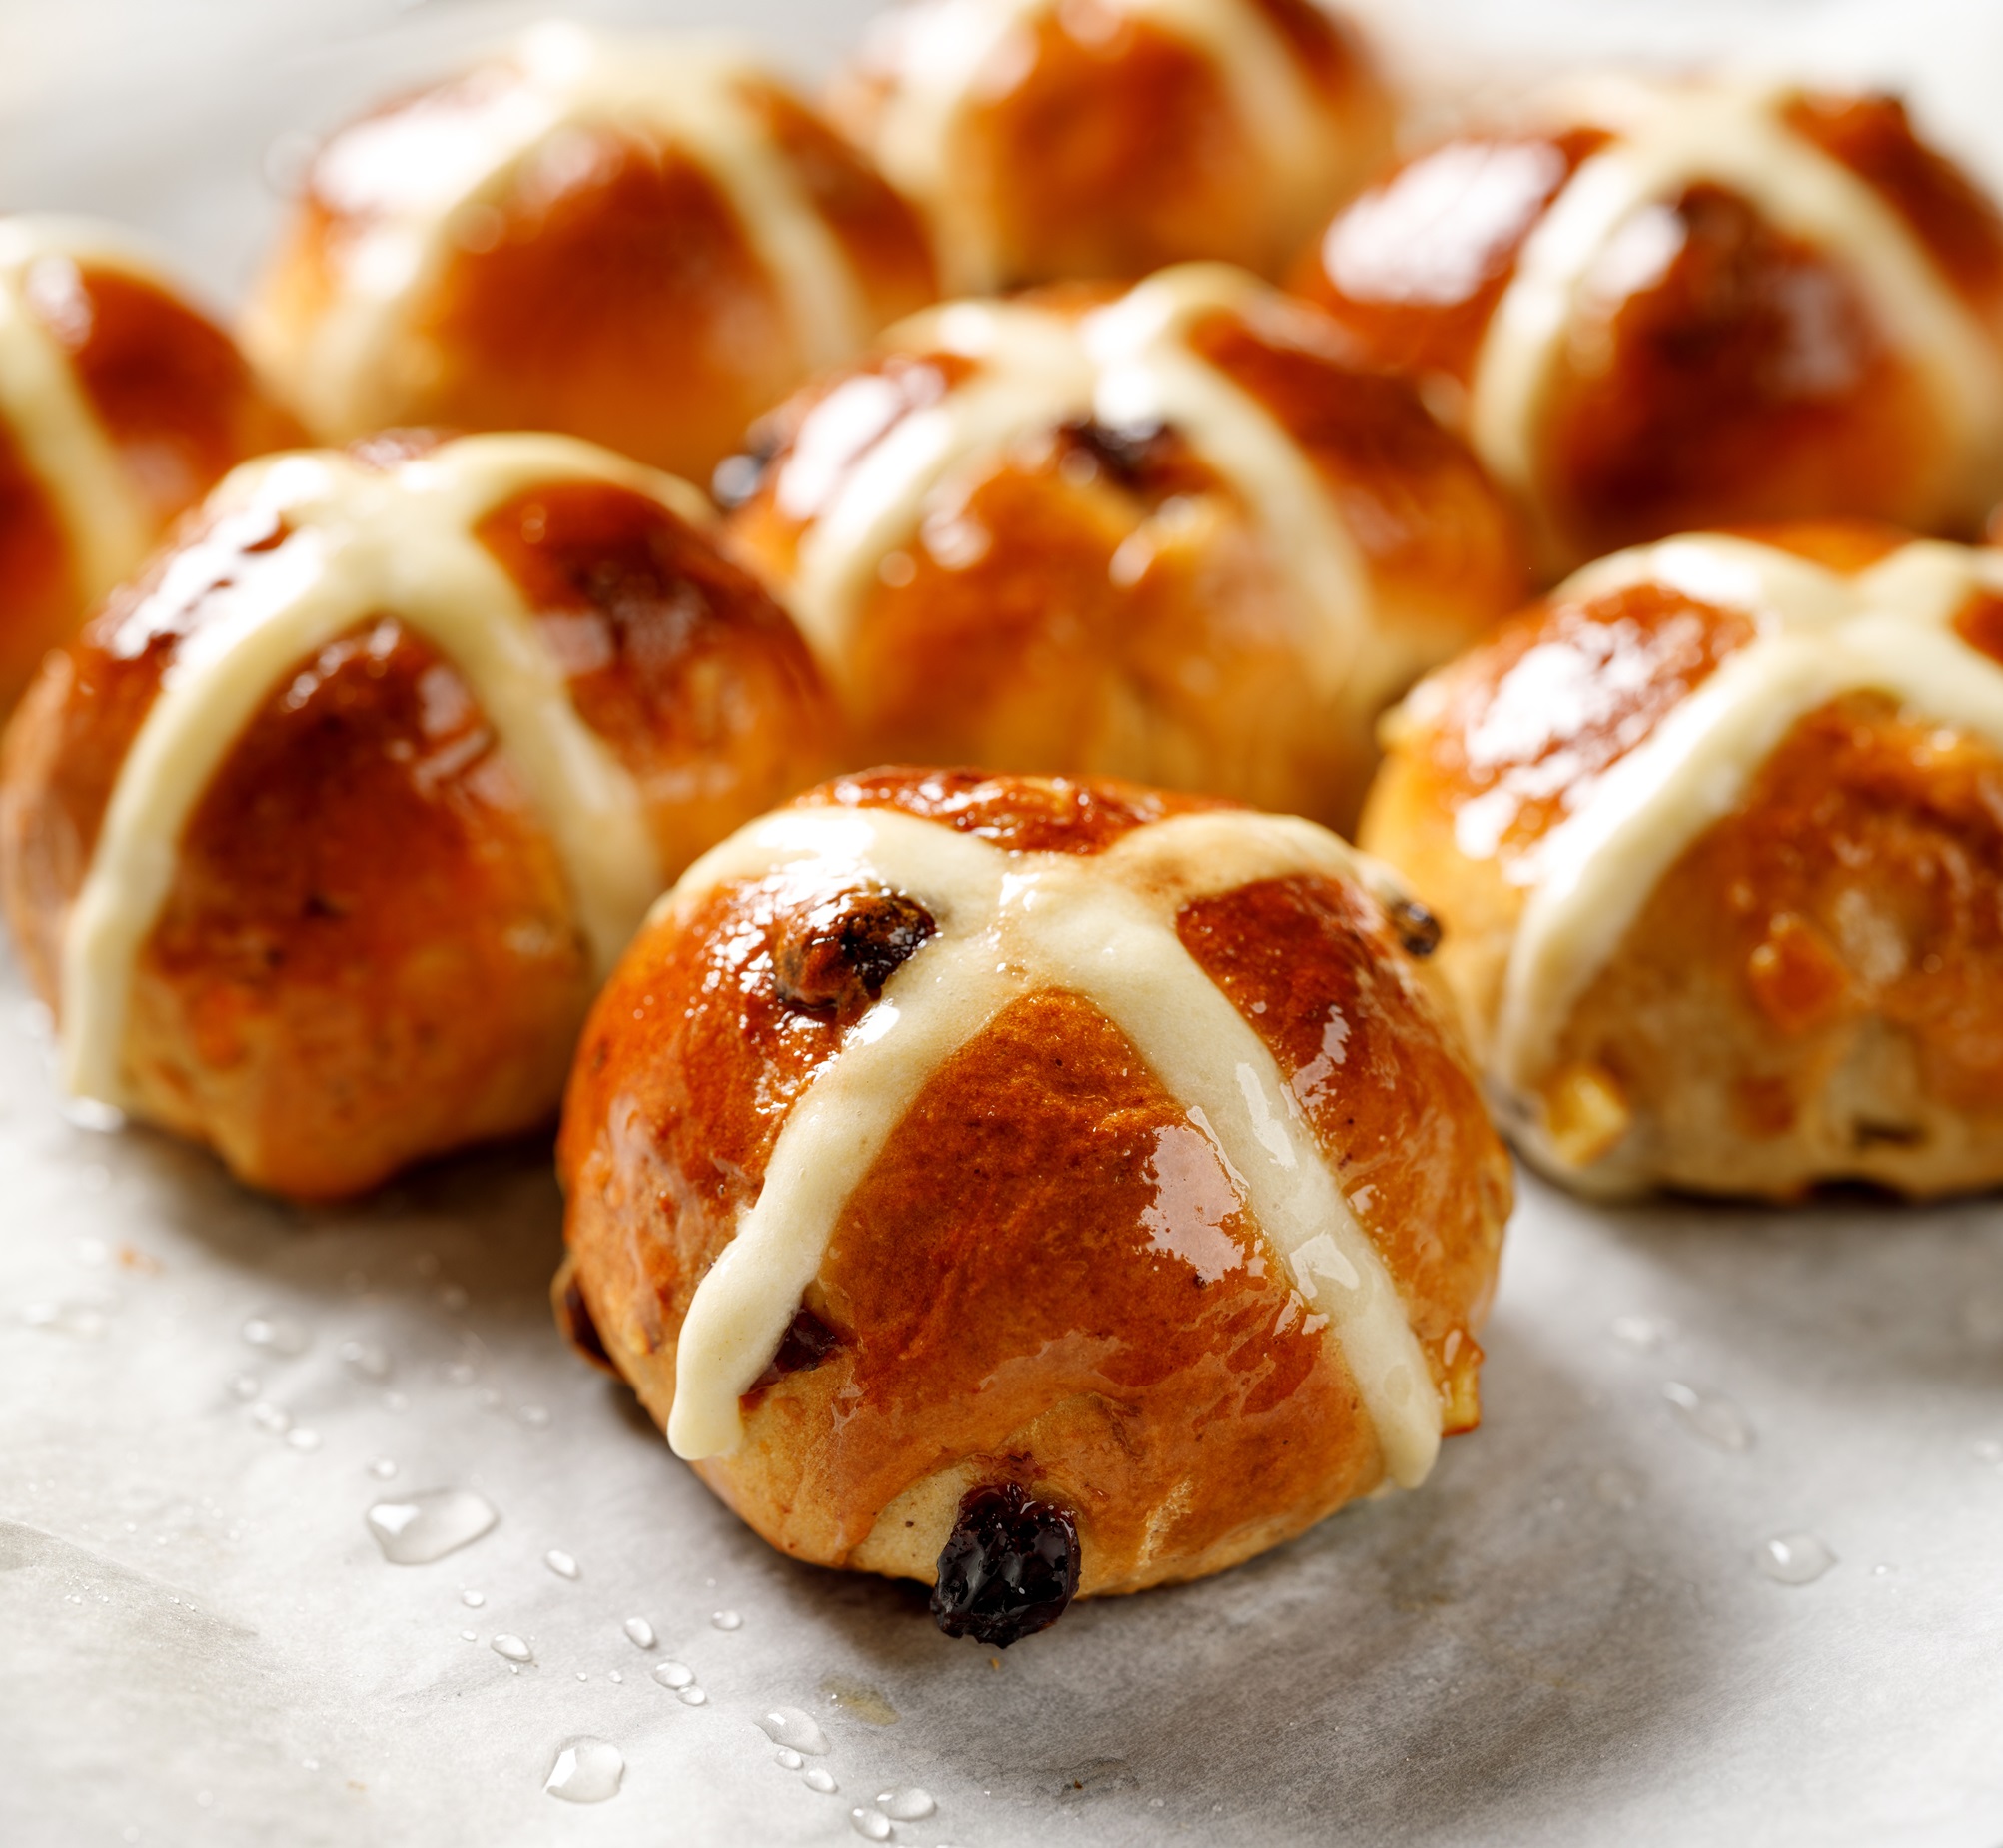 A set of glistening hot cross buns with a shiny glaze, a rich brown colour and some currants peeking out.